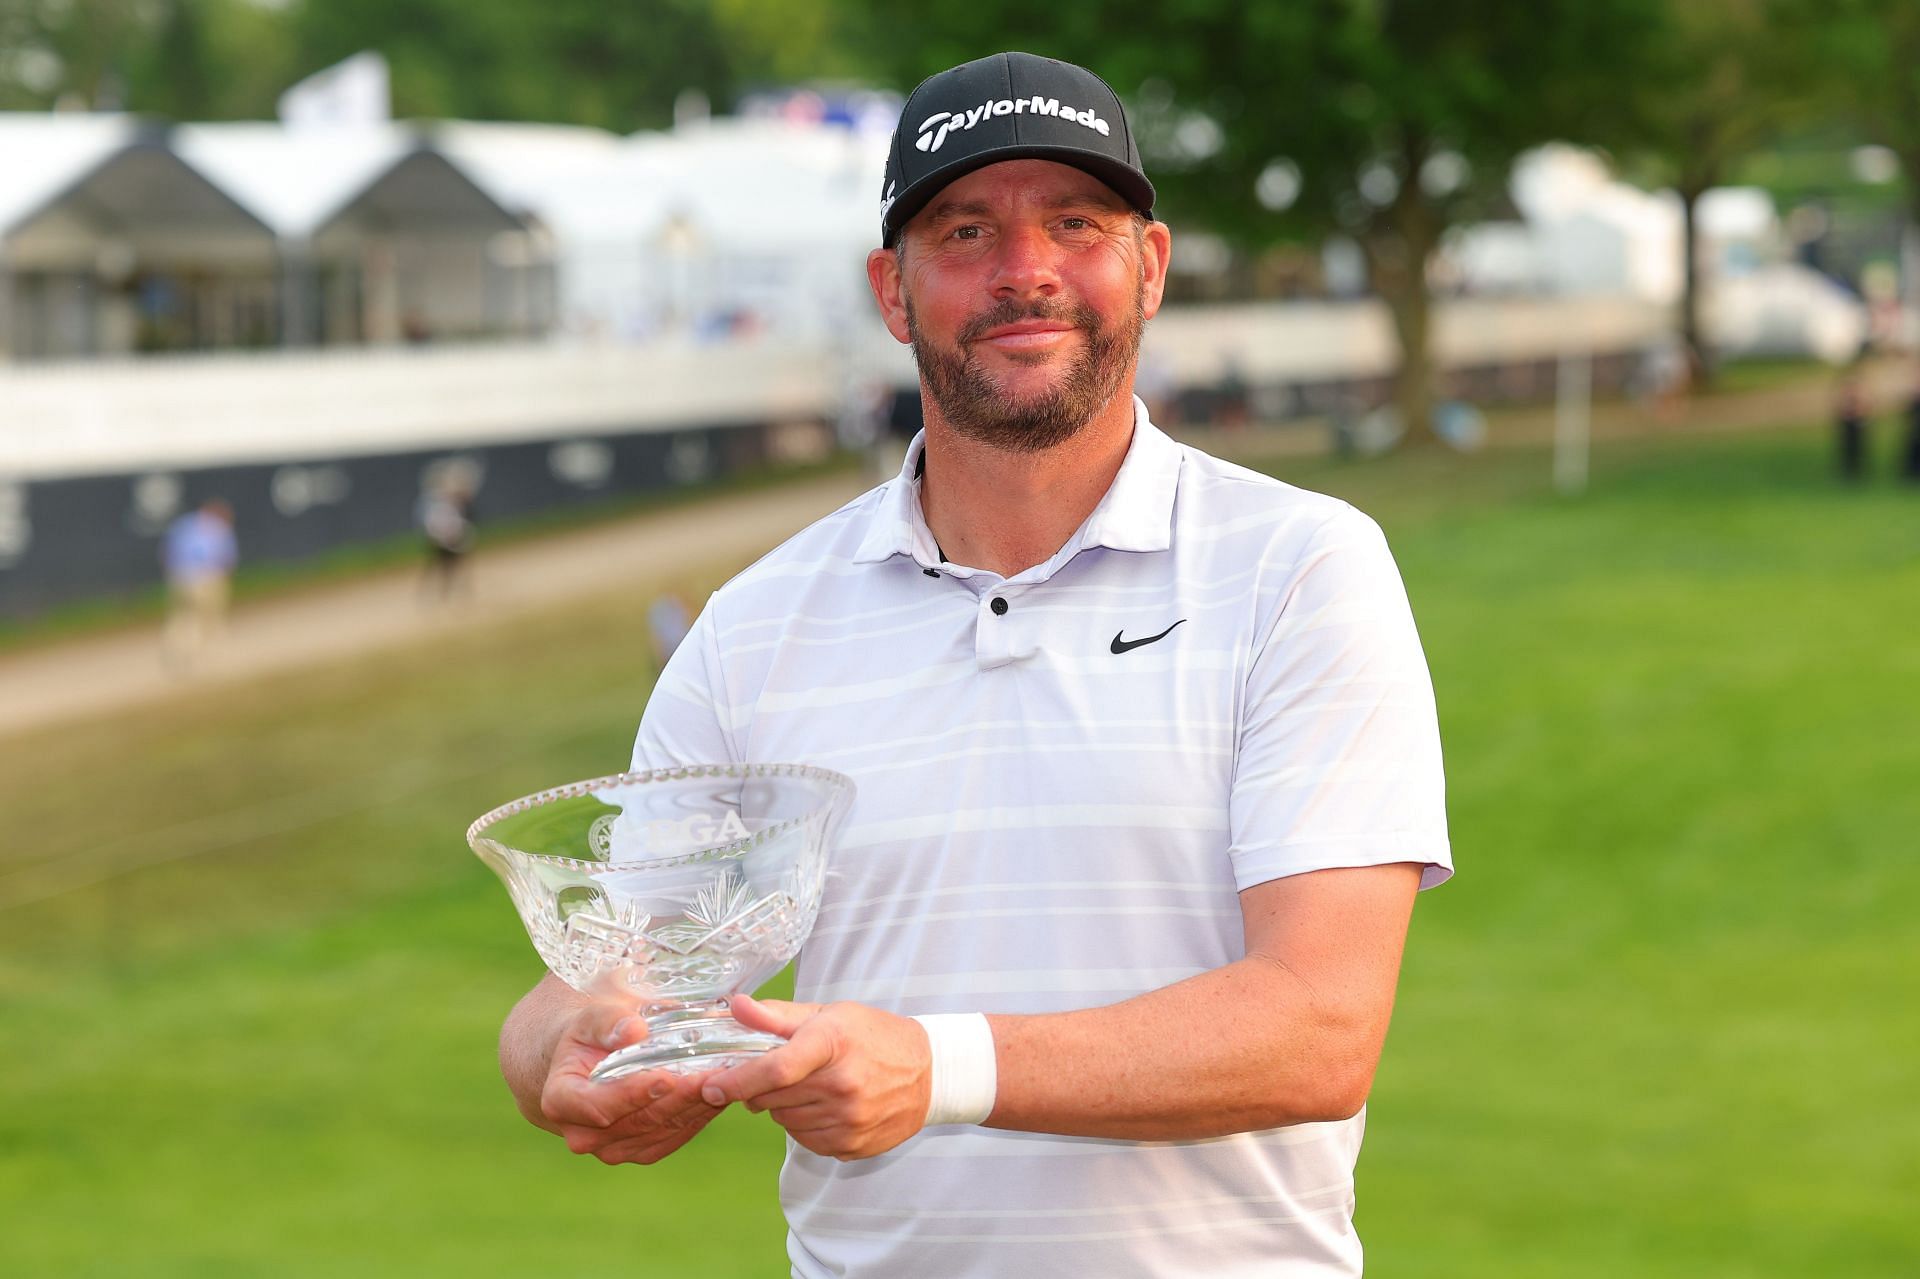 Michael Block with Low Club professional trophy at the 2023 PGA Championship (via Getty Images)